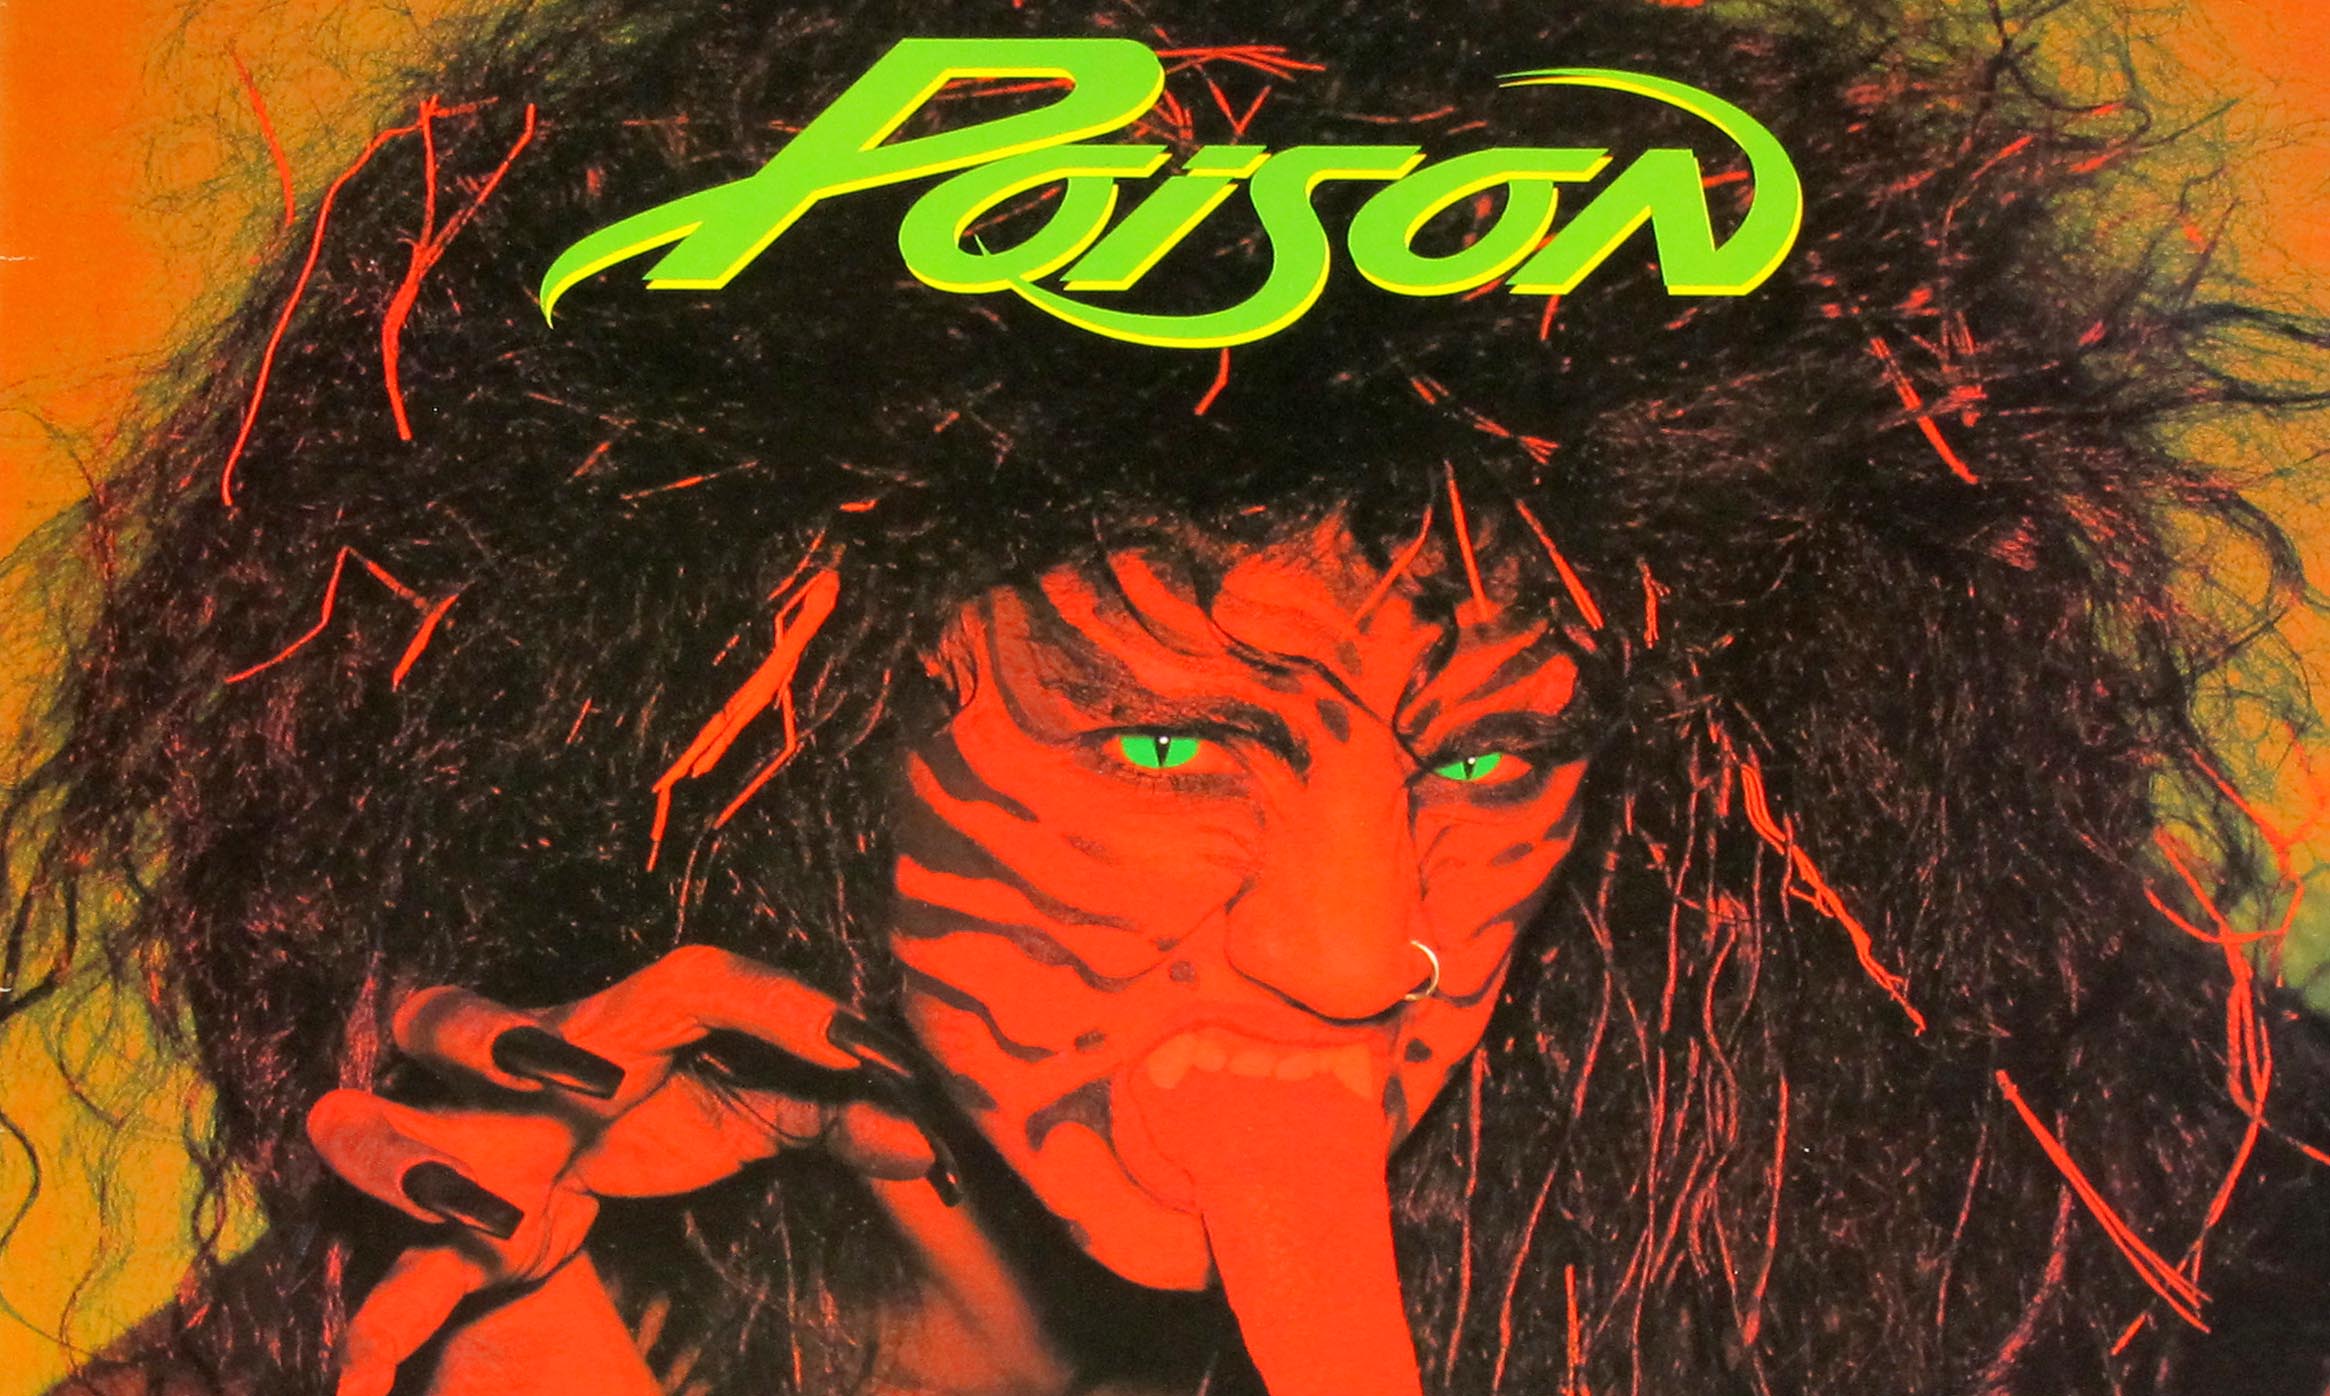 large photo of the album front cover of: POISON 